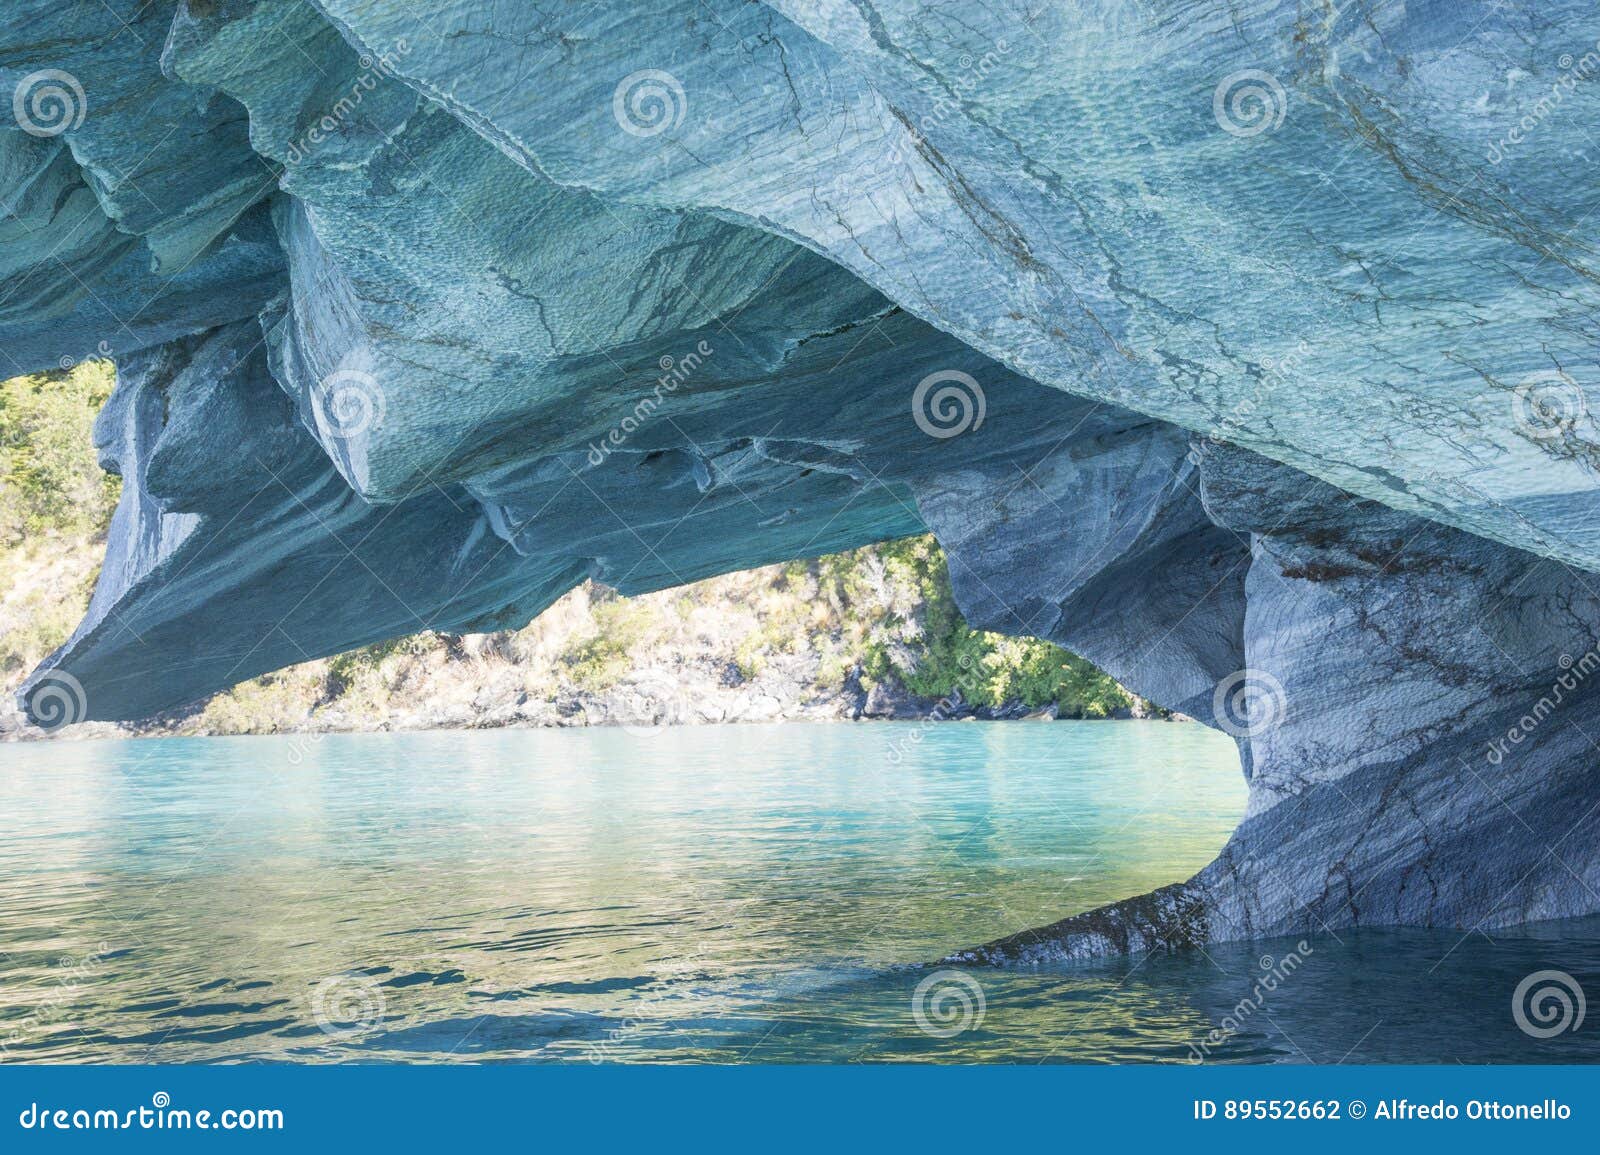 marble cathedral, general carrera lake, chile.